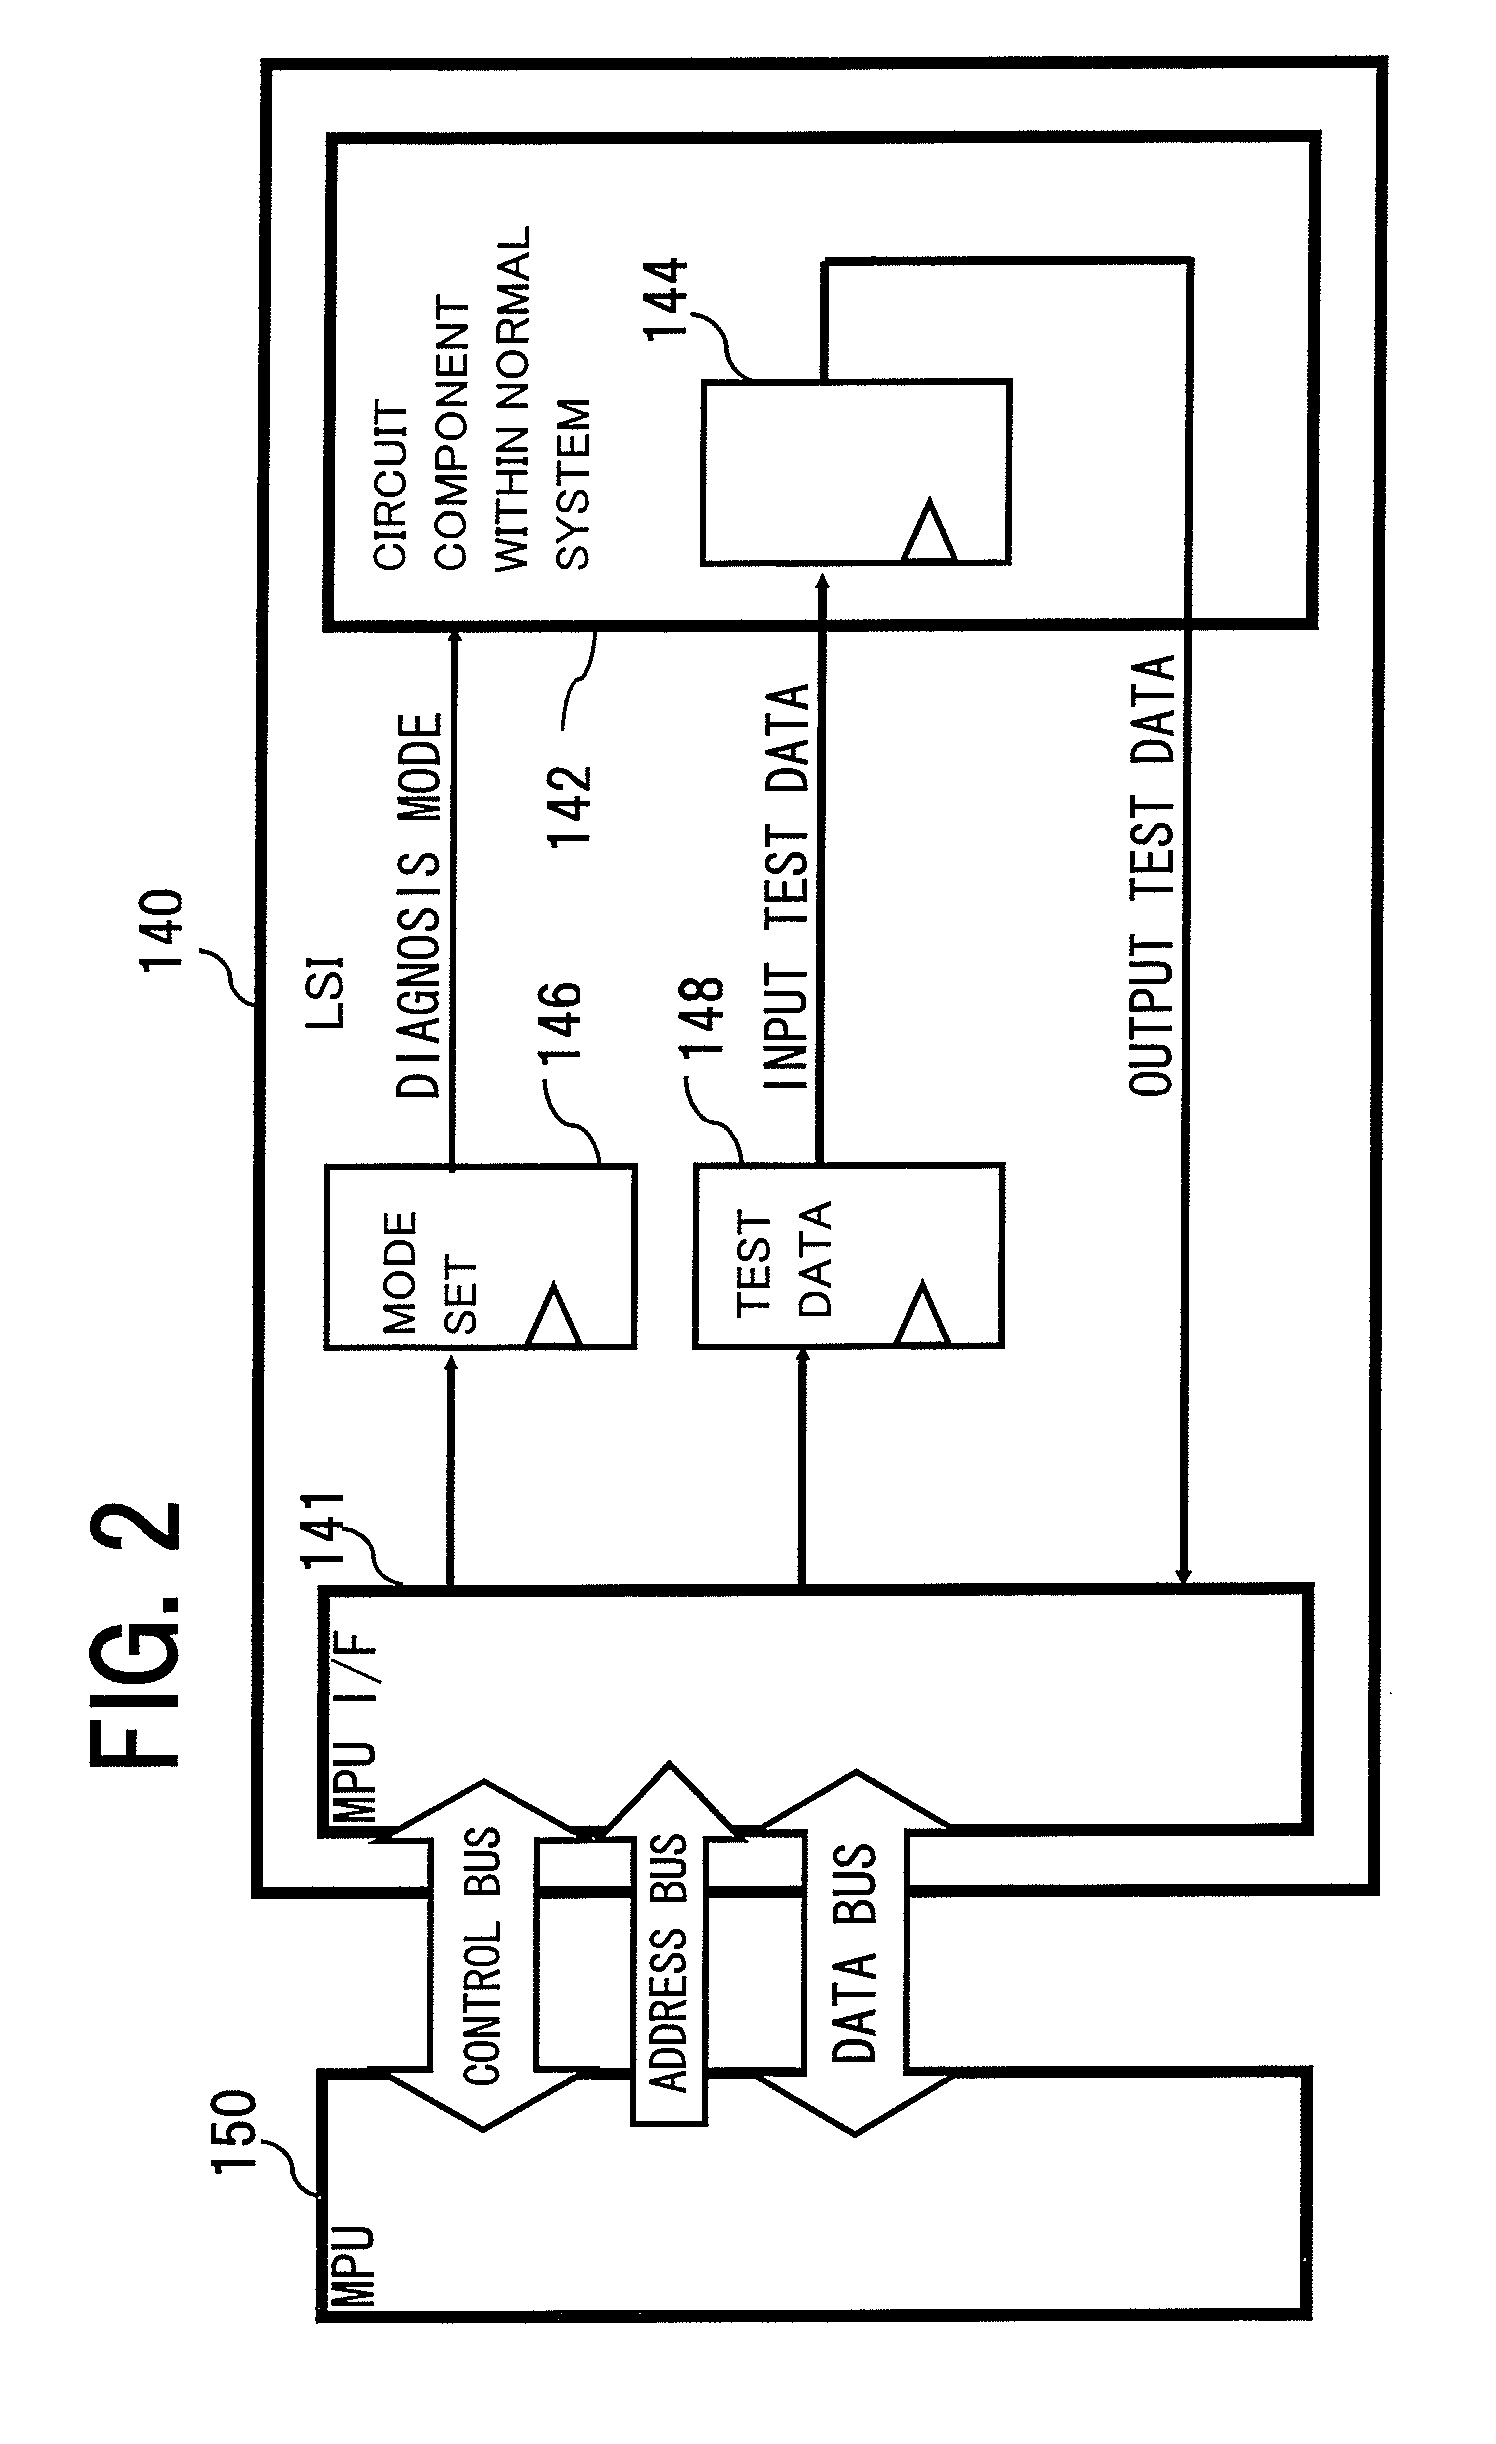 Large scale integration device and large scale integration design method including both a normal system and diagnostic system